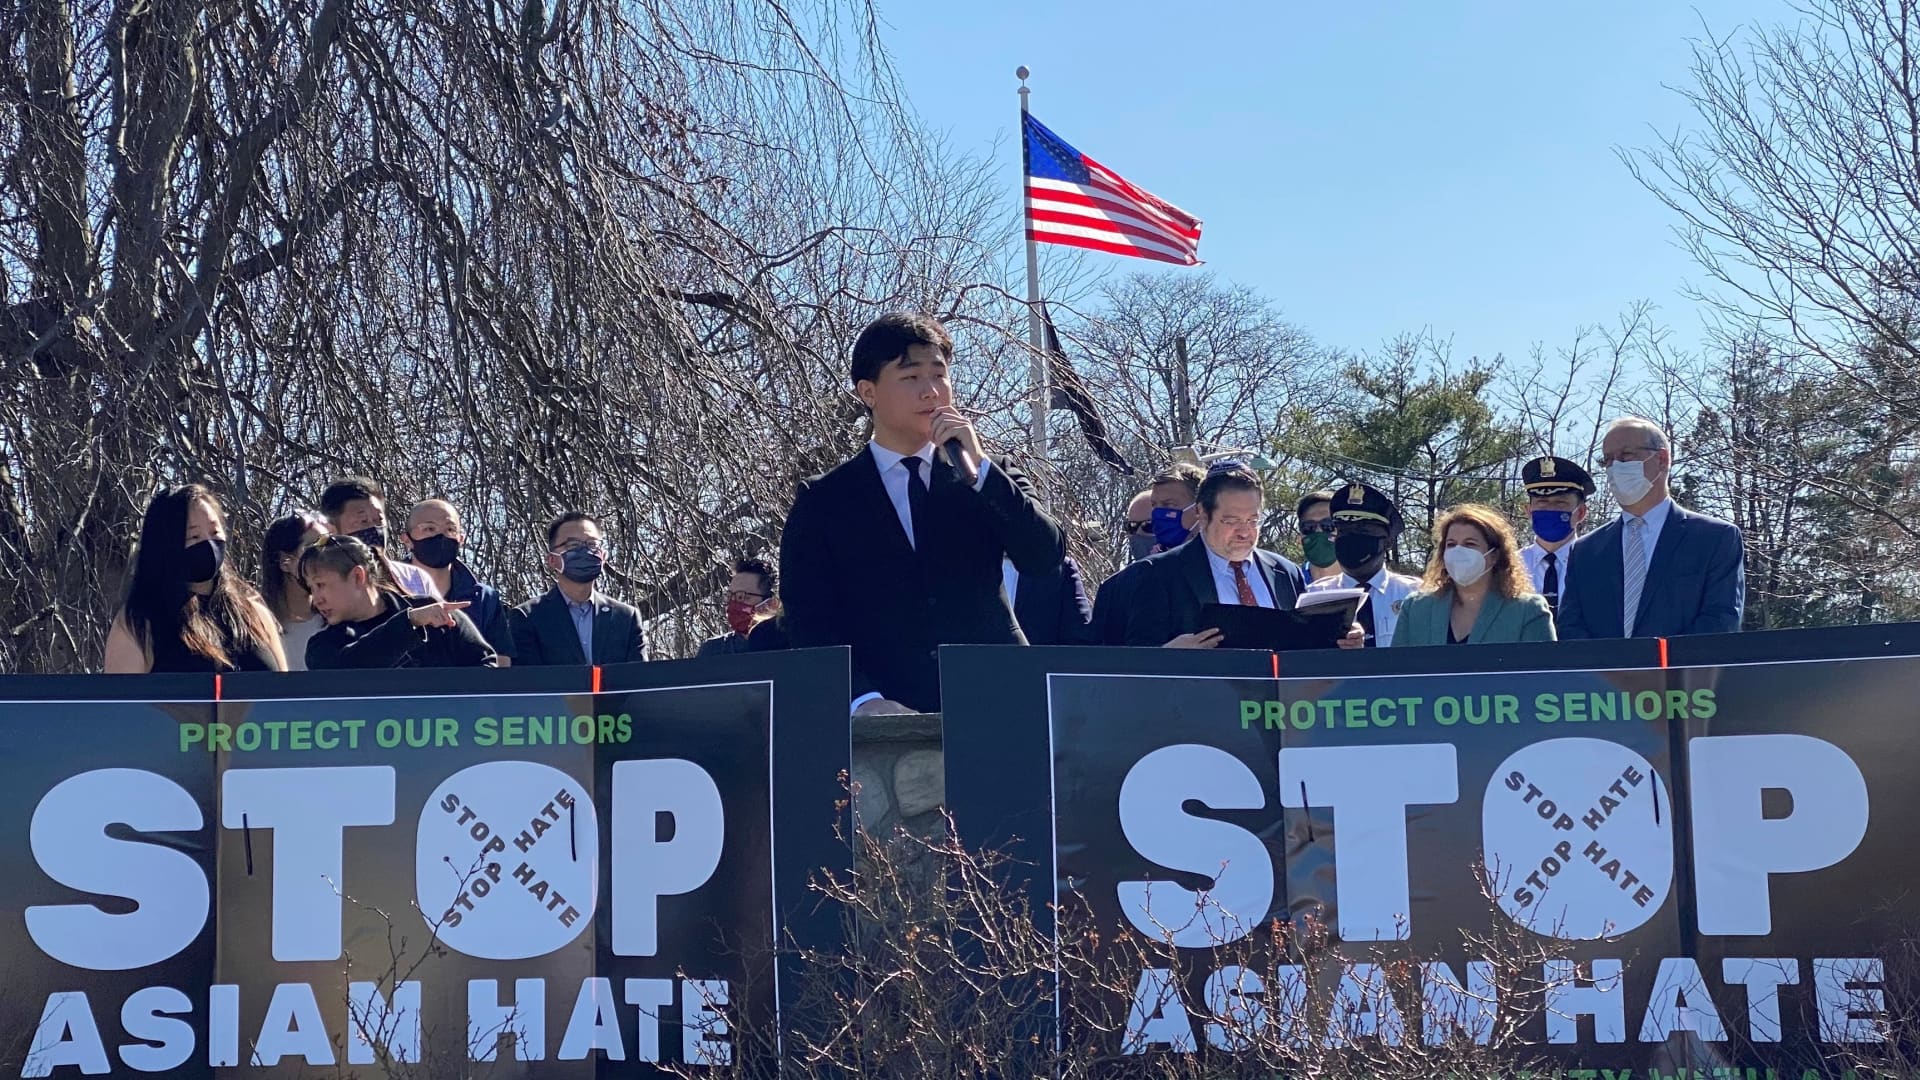 Brian Jon, 19, established the Asian American Youth Council in 2017 to encourage activism among AAPI students.